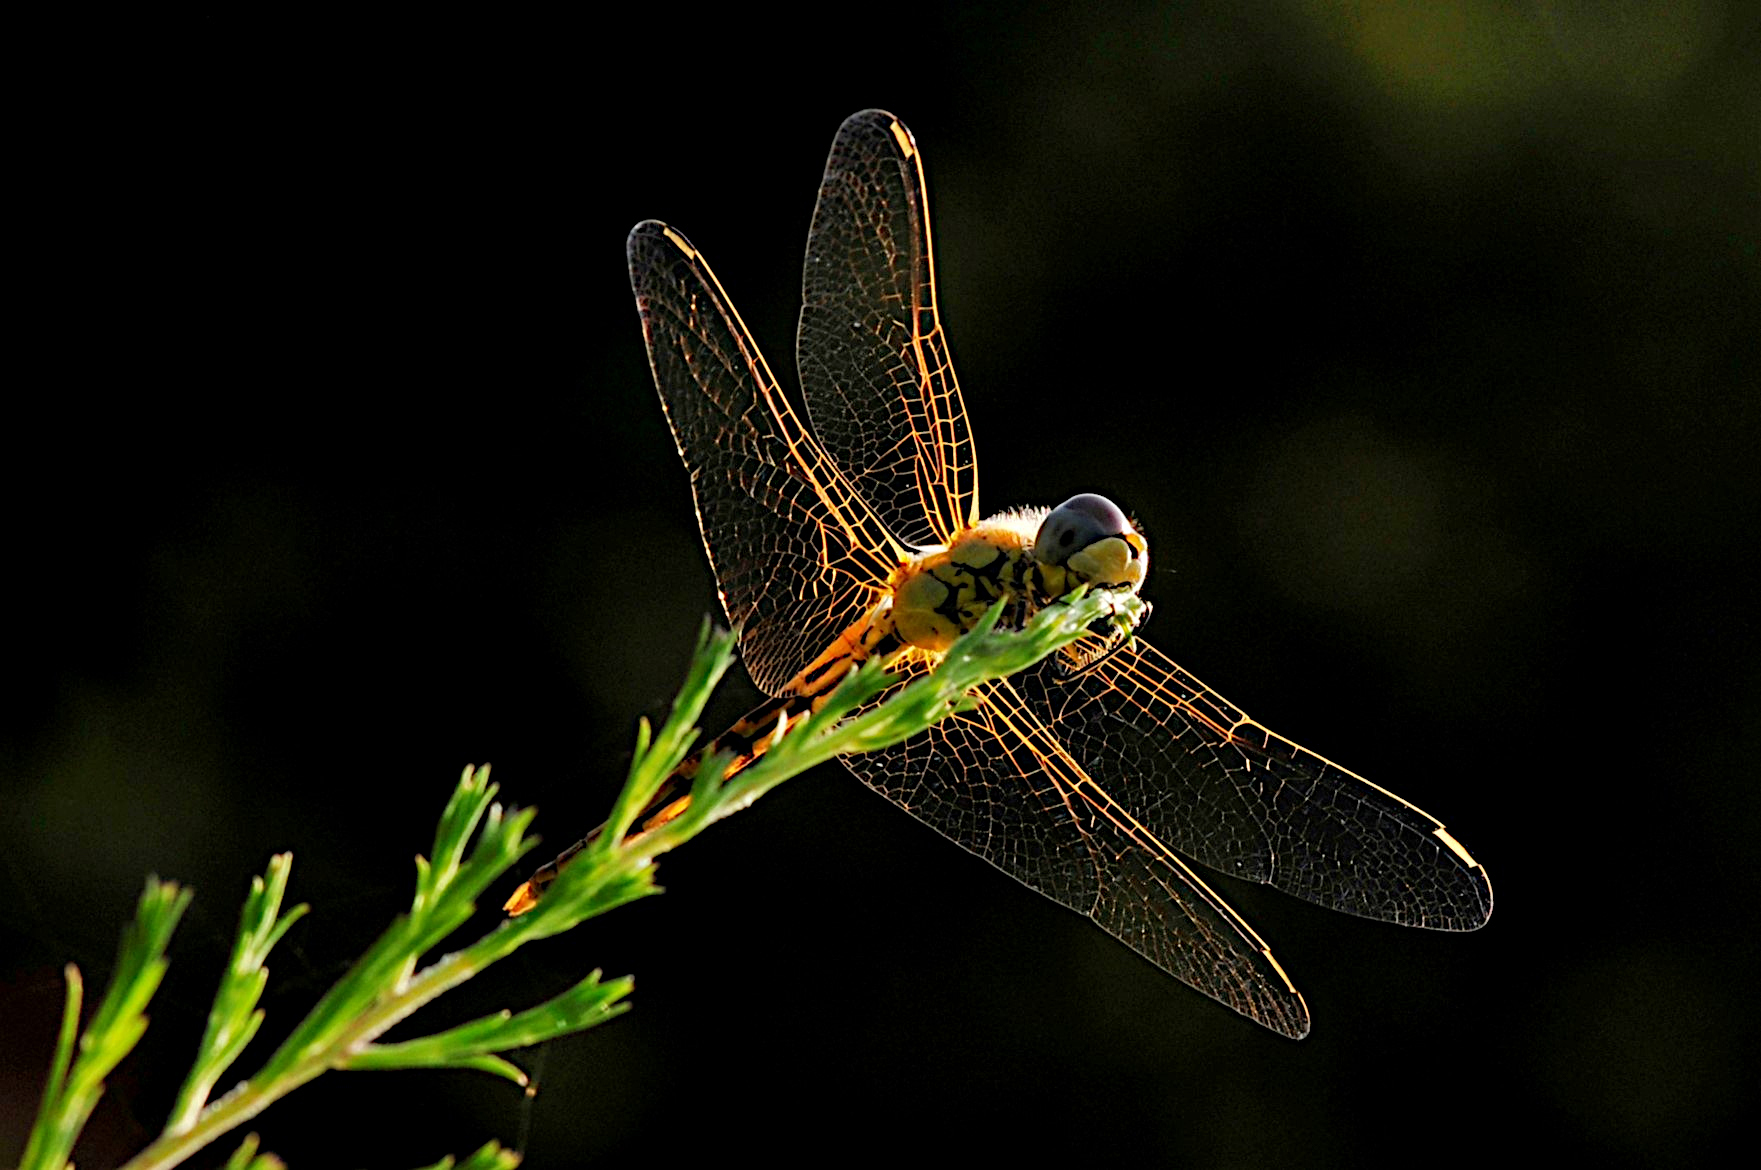 The dragonfly...